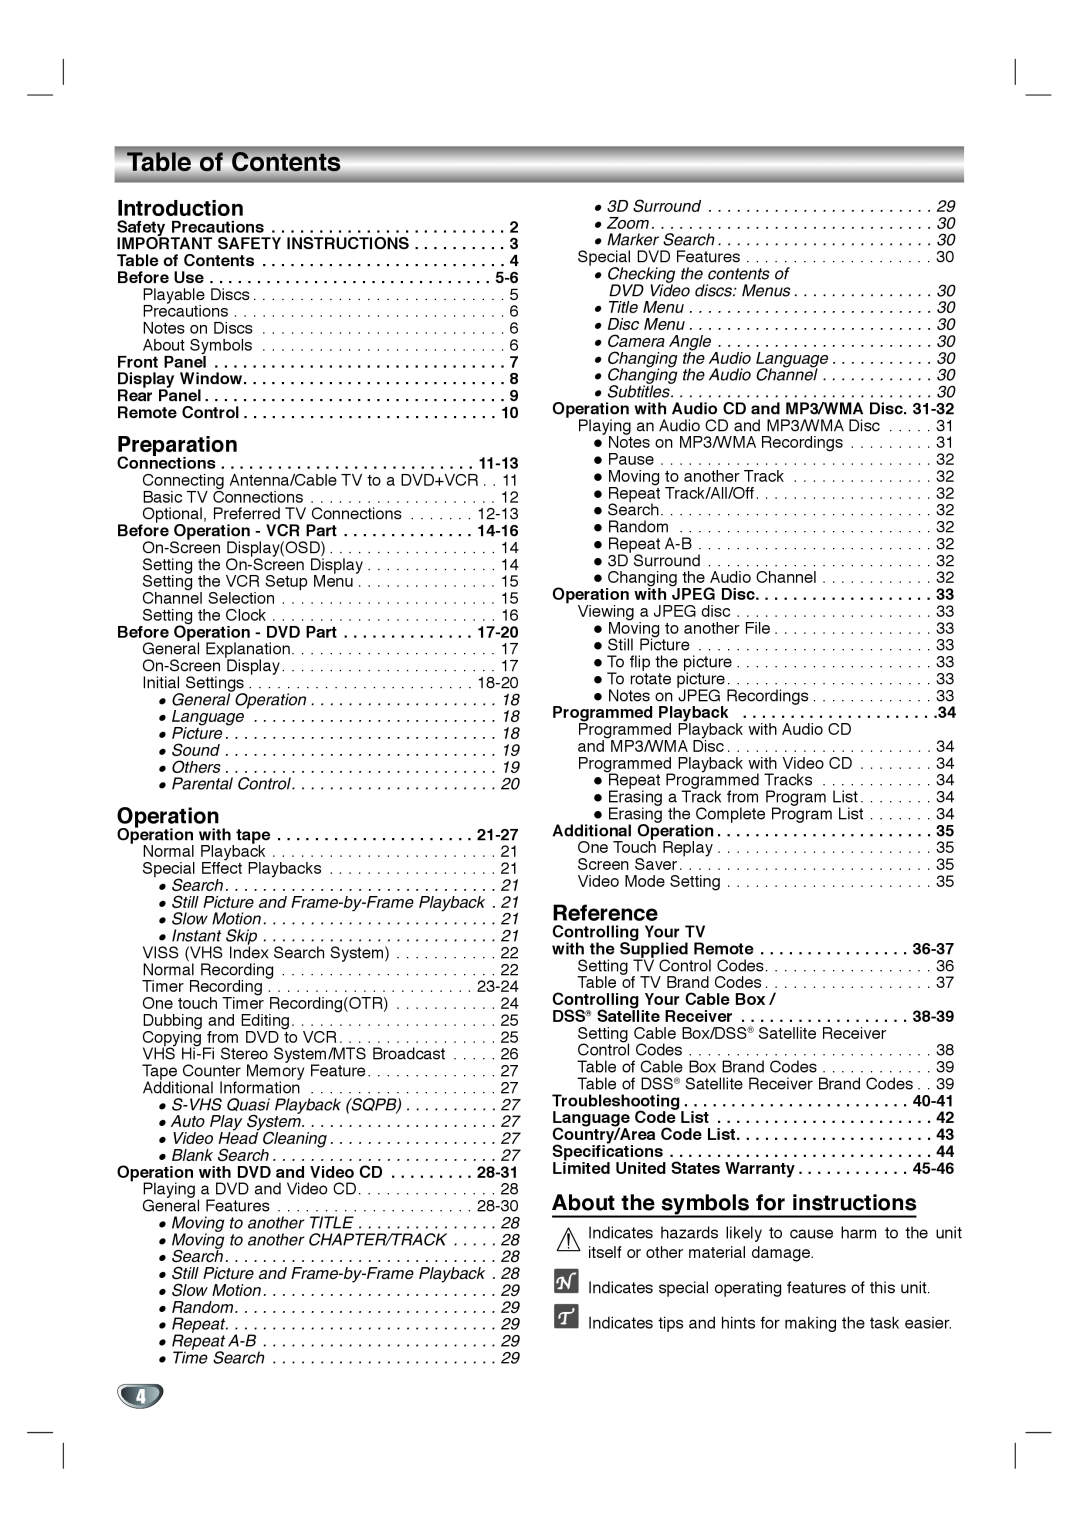 Toshiba SD-K530SU Table of Contents, Introduction, Preparation, Operation, Reference, About the symbols for instructions 